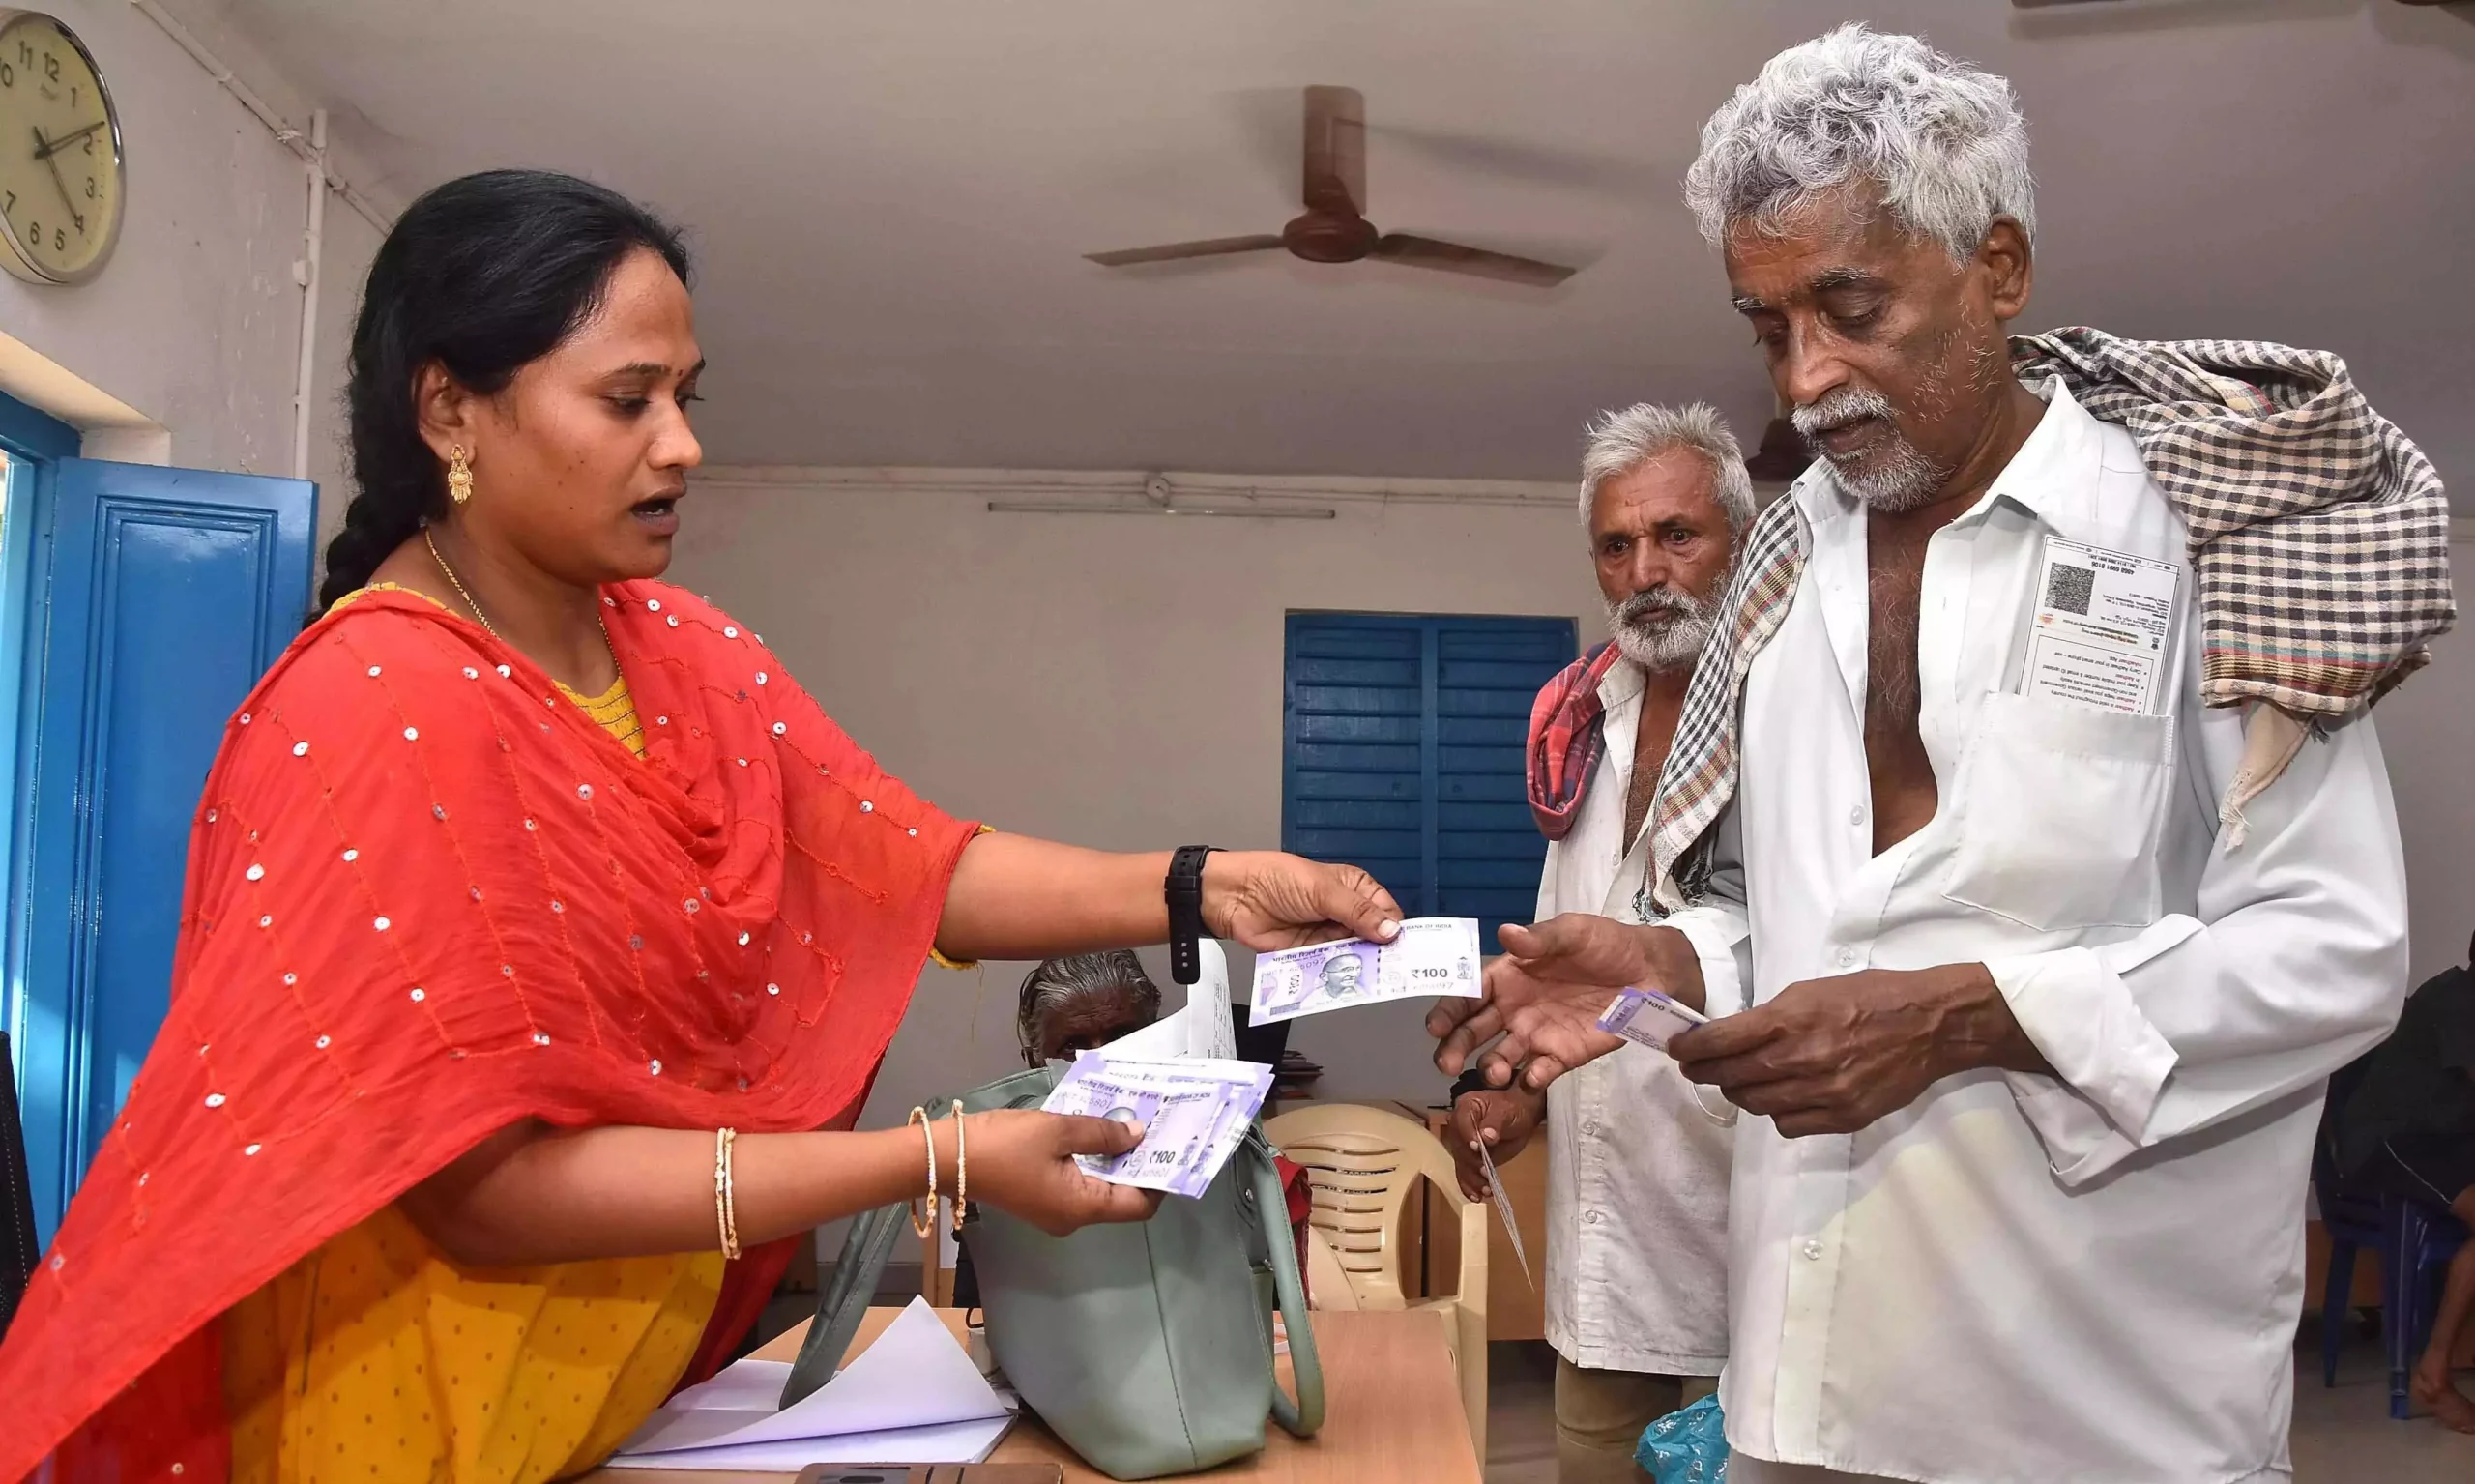 65.50 lakh social security pensioners important in Andhra Pradesh elections